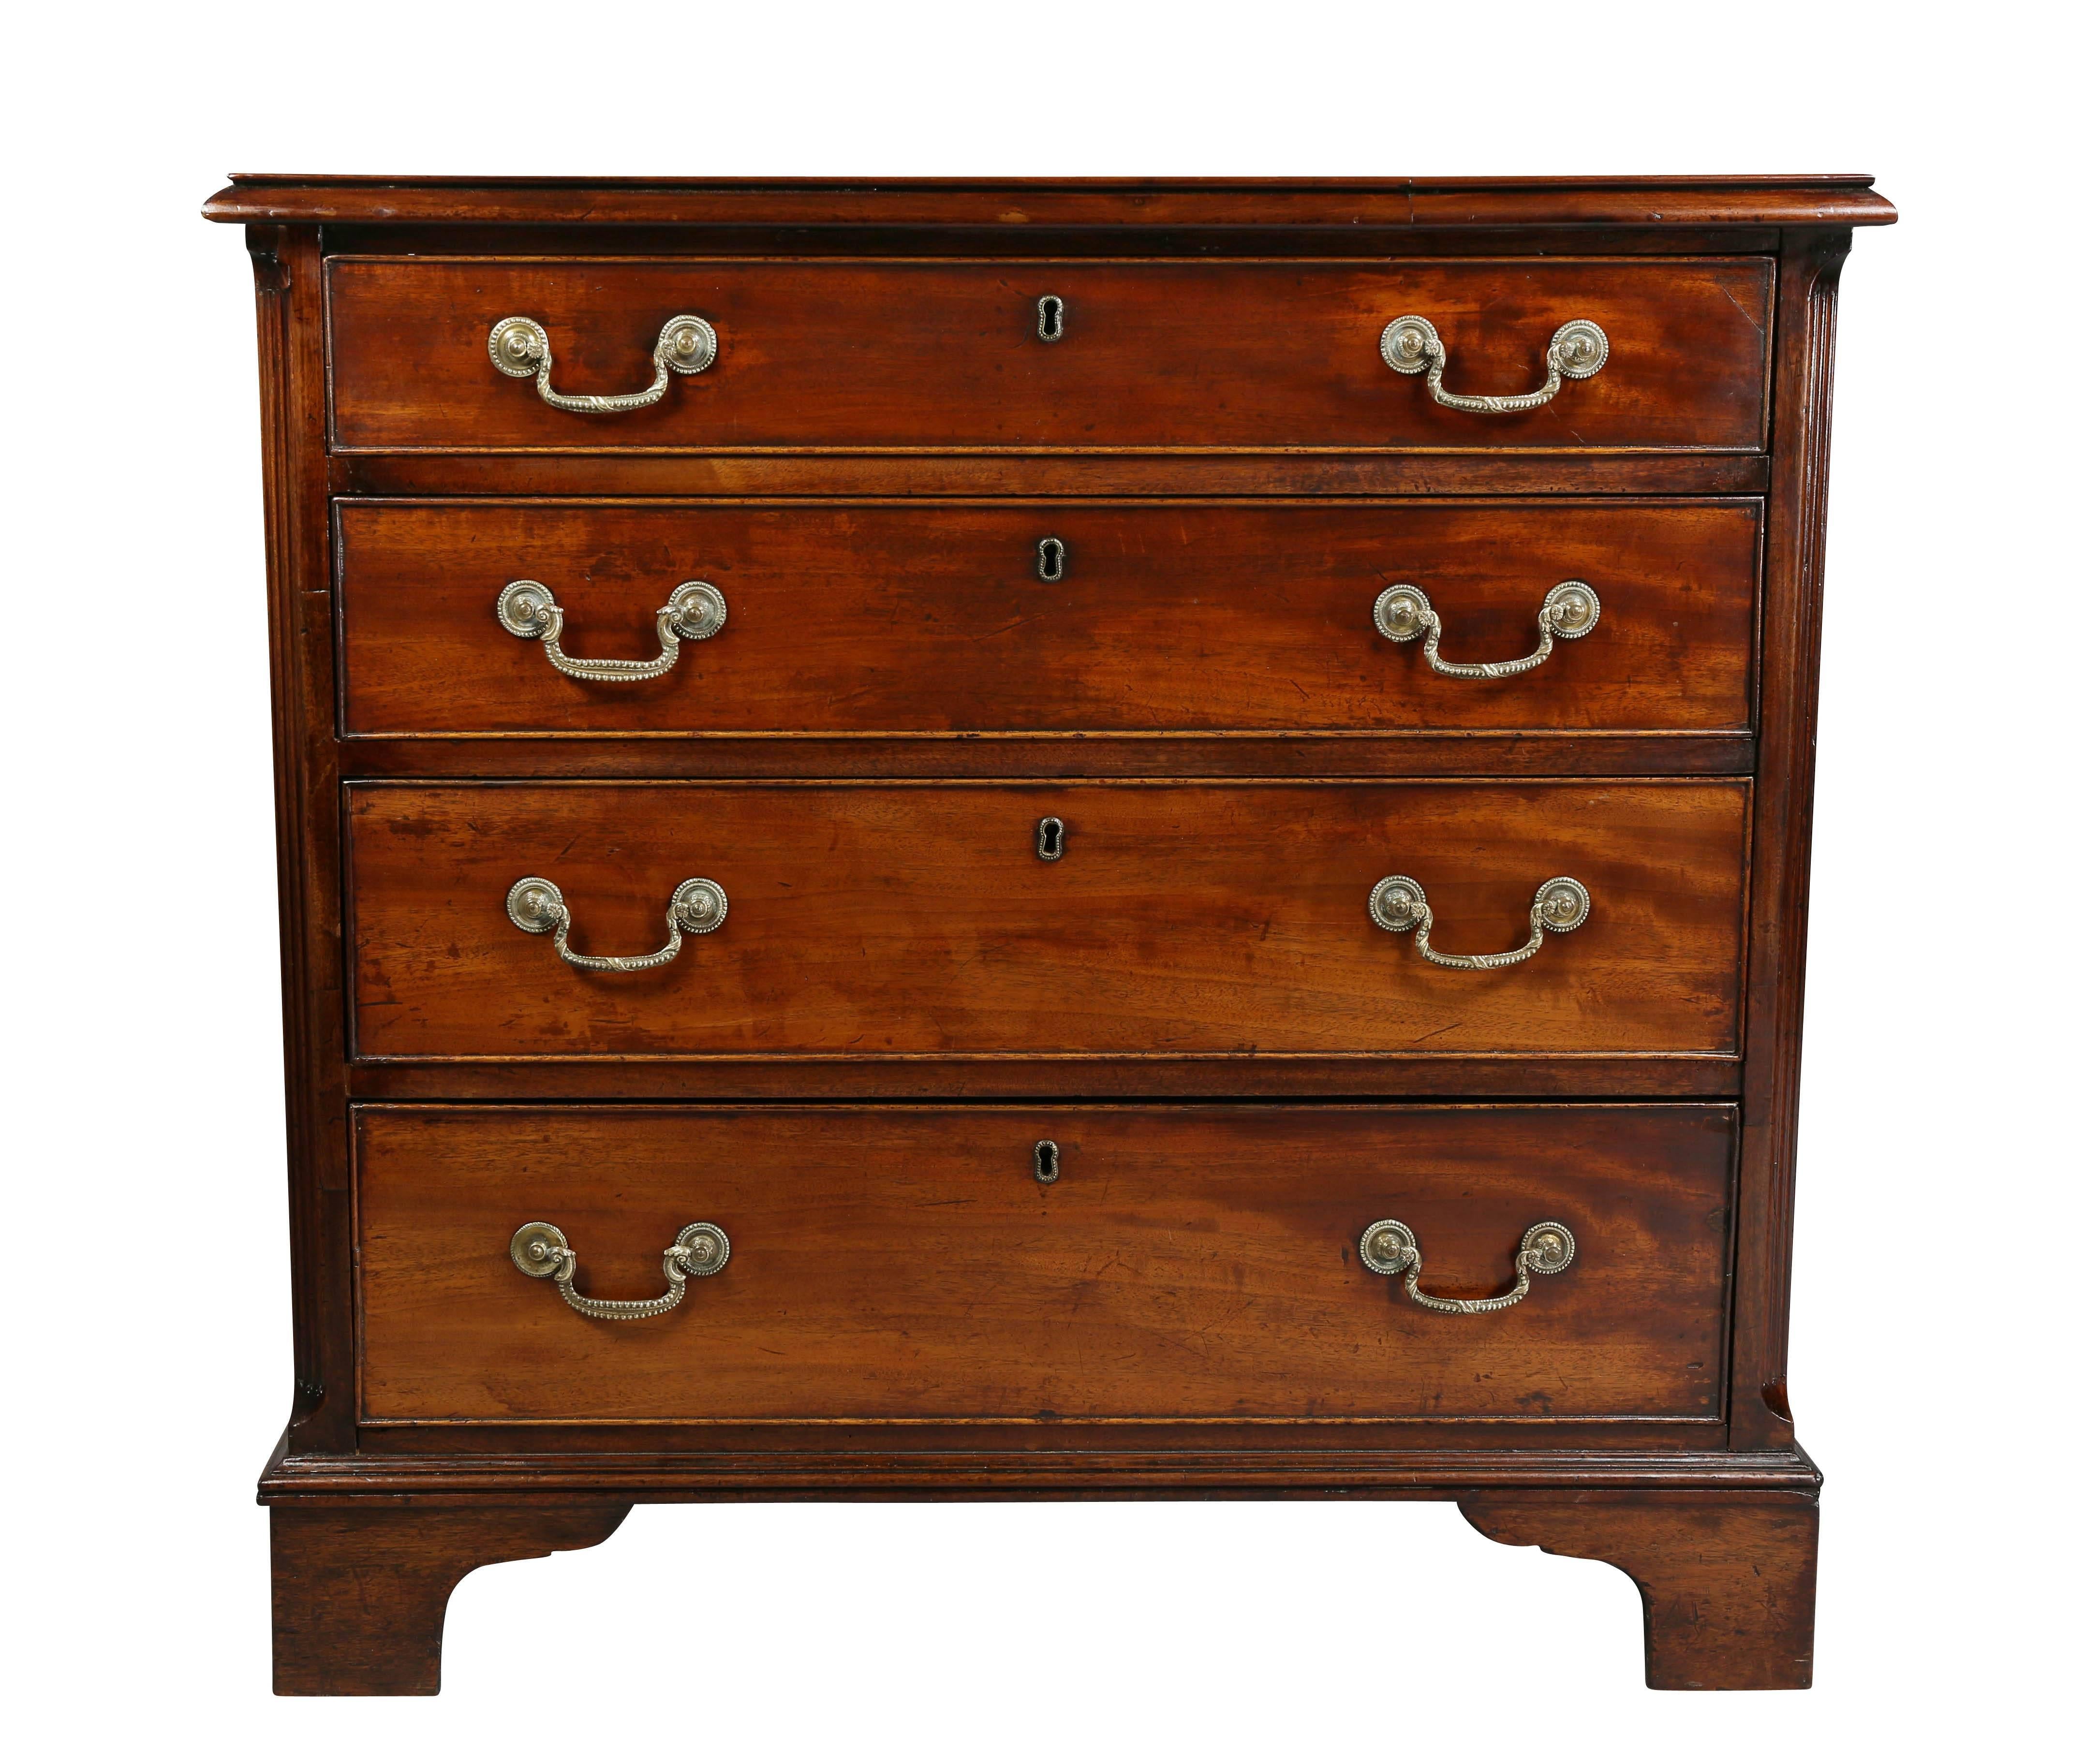 Rectangular top with crossbanding and inlay, molded edge raised on four graduated drawers flanked by chamfered fluted corners raised on bracket feet.